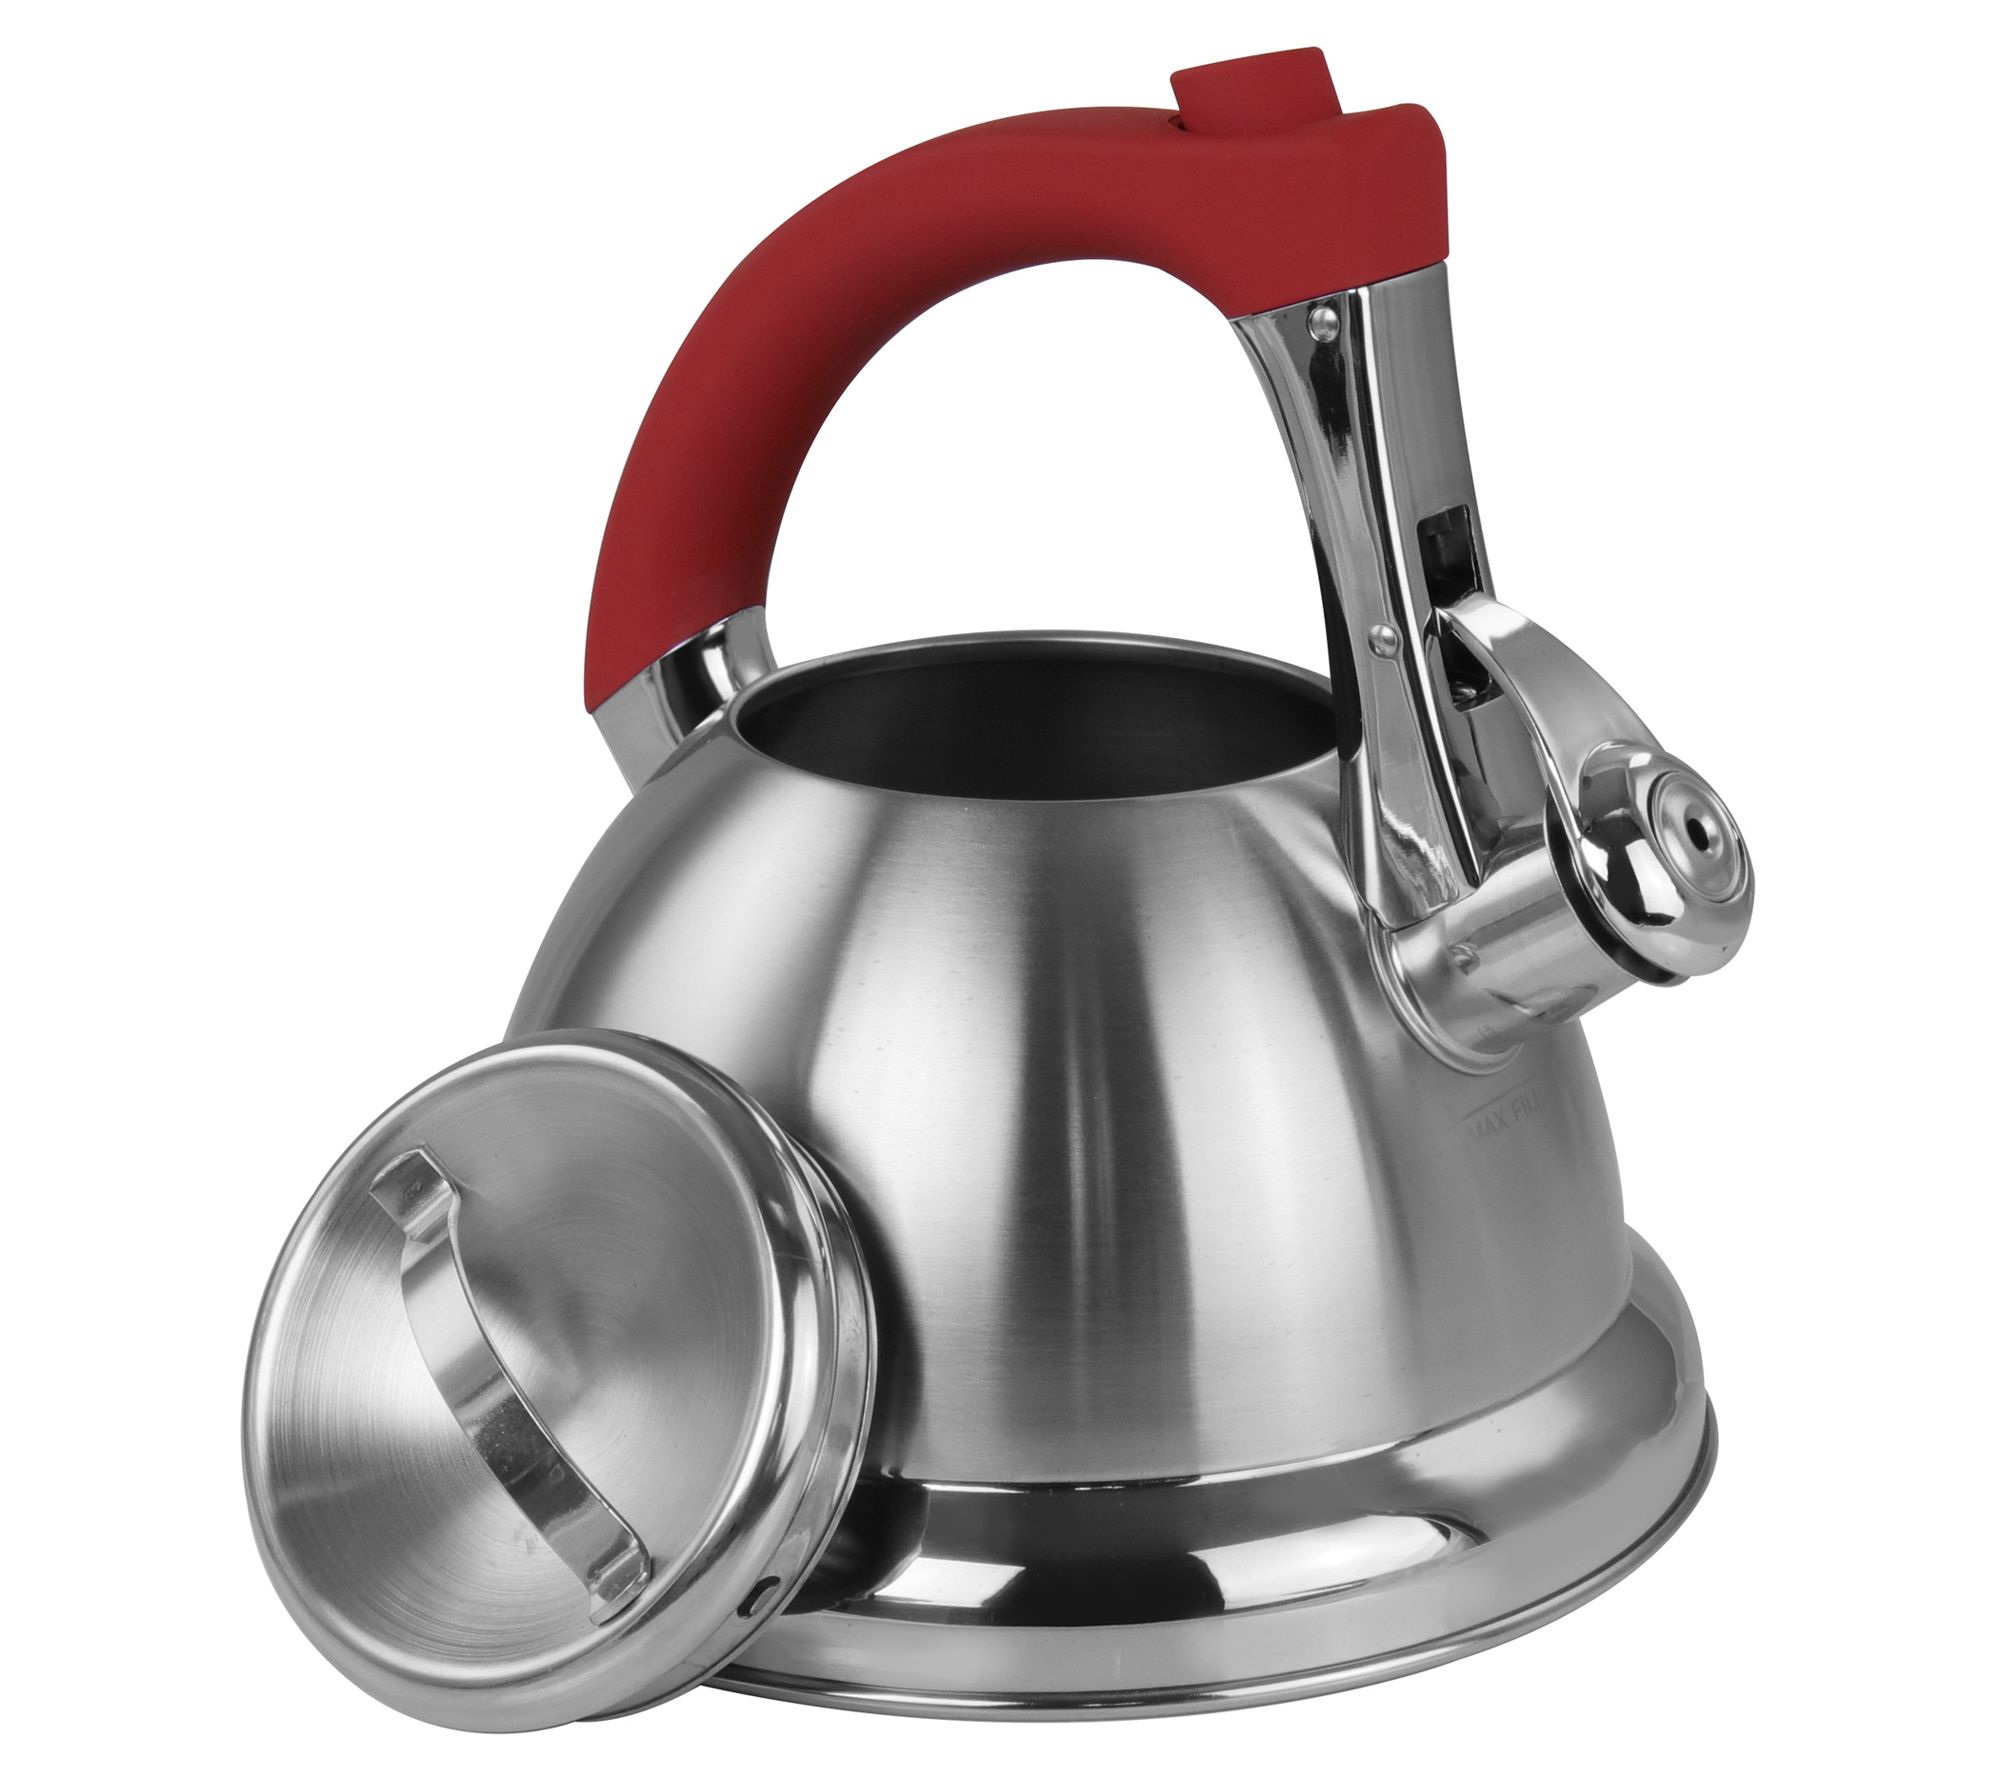 Mr Coffee Tea Kettle, Whistling, 1.75 Quarts, Party Supplies